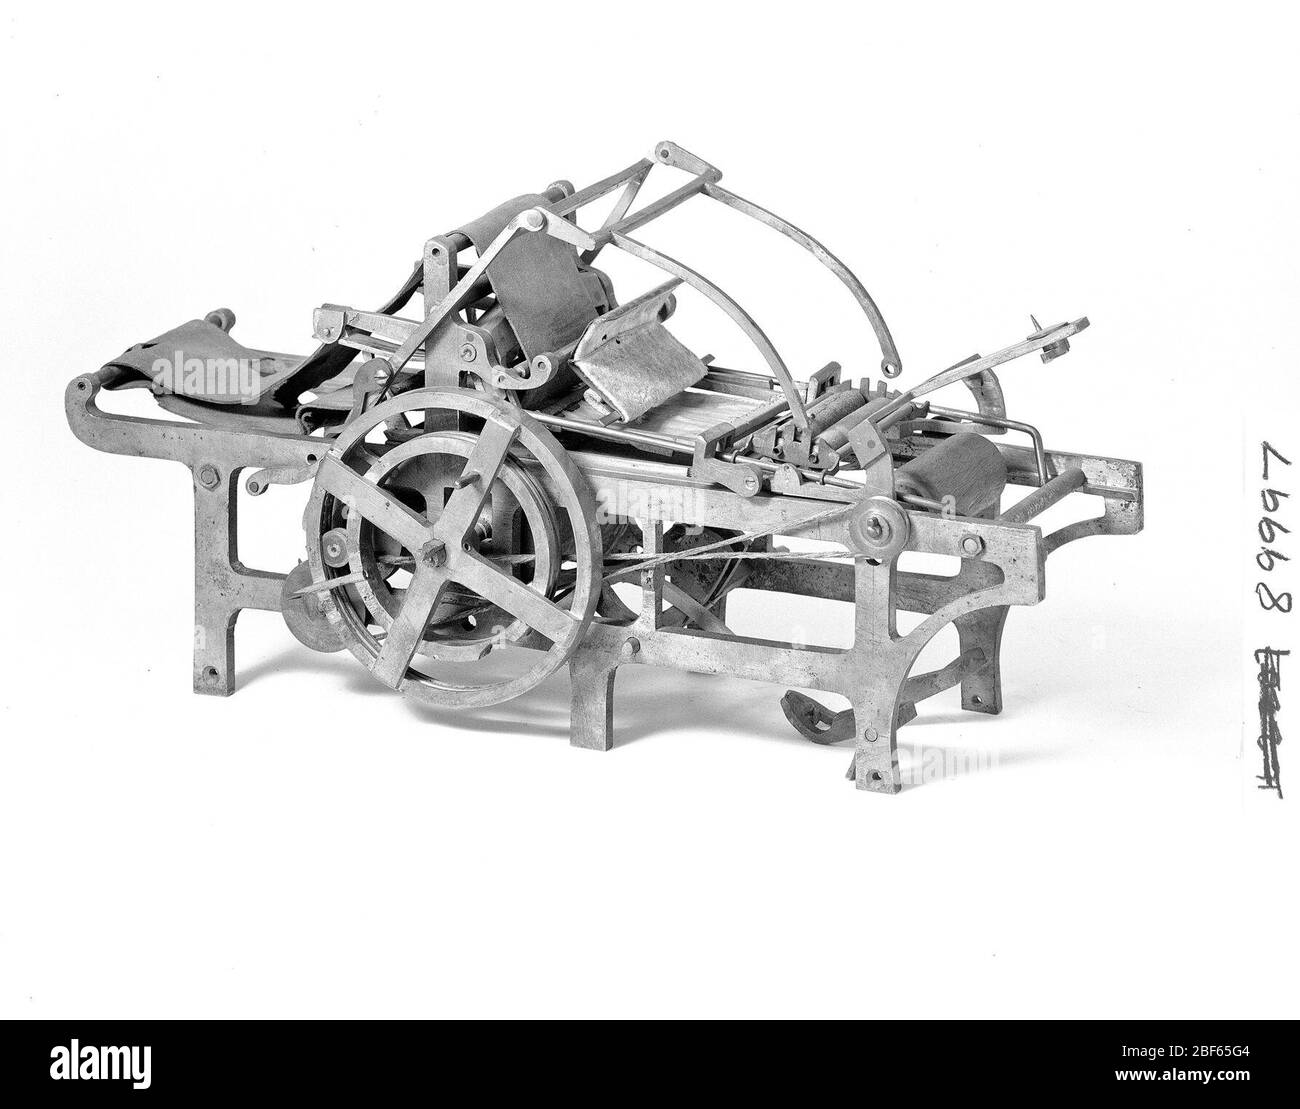 Patent Model for a Chromolithographic Press. This patent model demonstrates an invention for a chromolithographic press which was granted patent number 89997. The patent details a flatbed scraper machine with automatic inking, damping, feeding, and delivery. Stock Photo